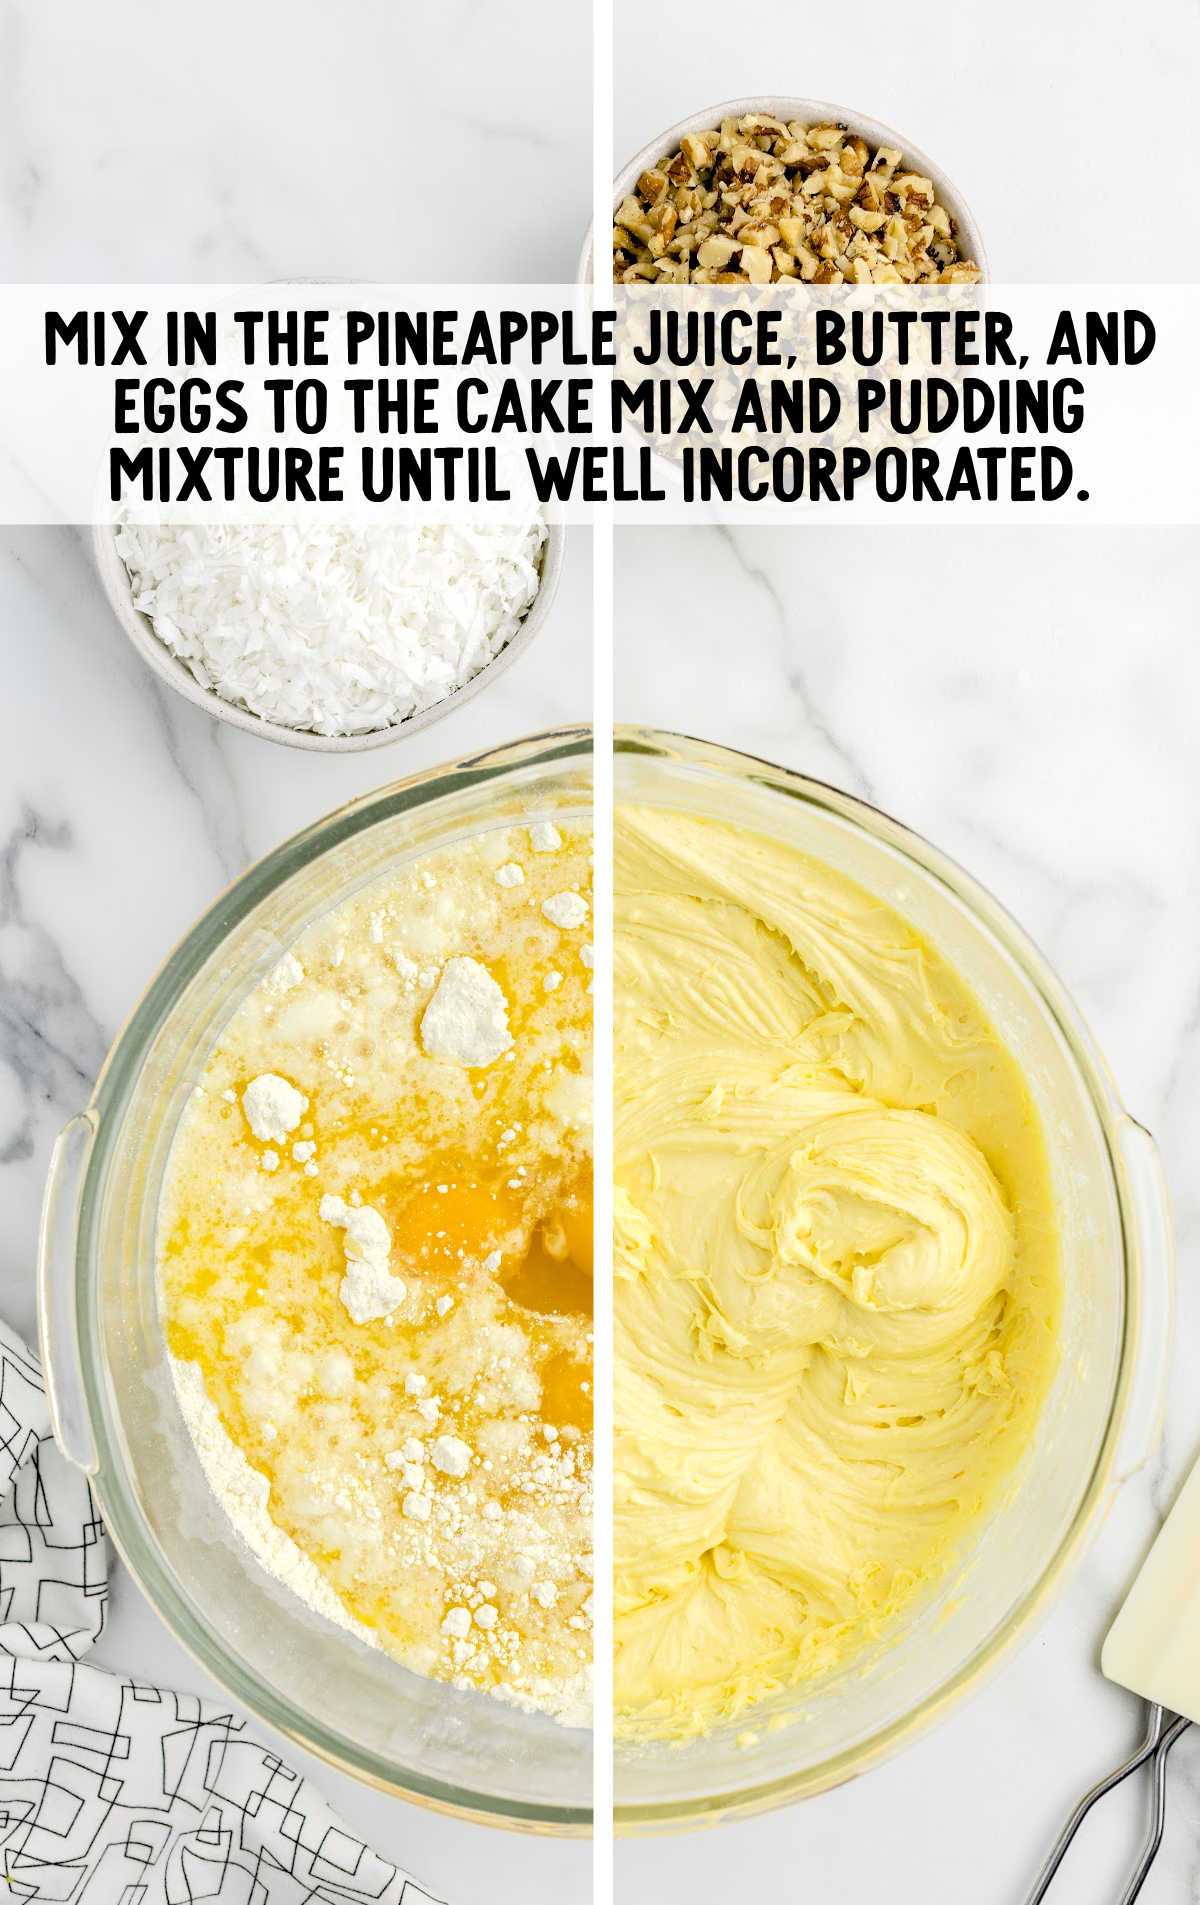 pineapple juice, butter, and eggs mixed with the cake mix and pudding mixture